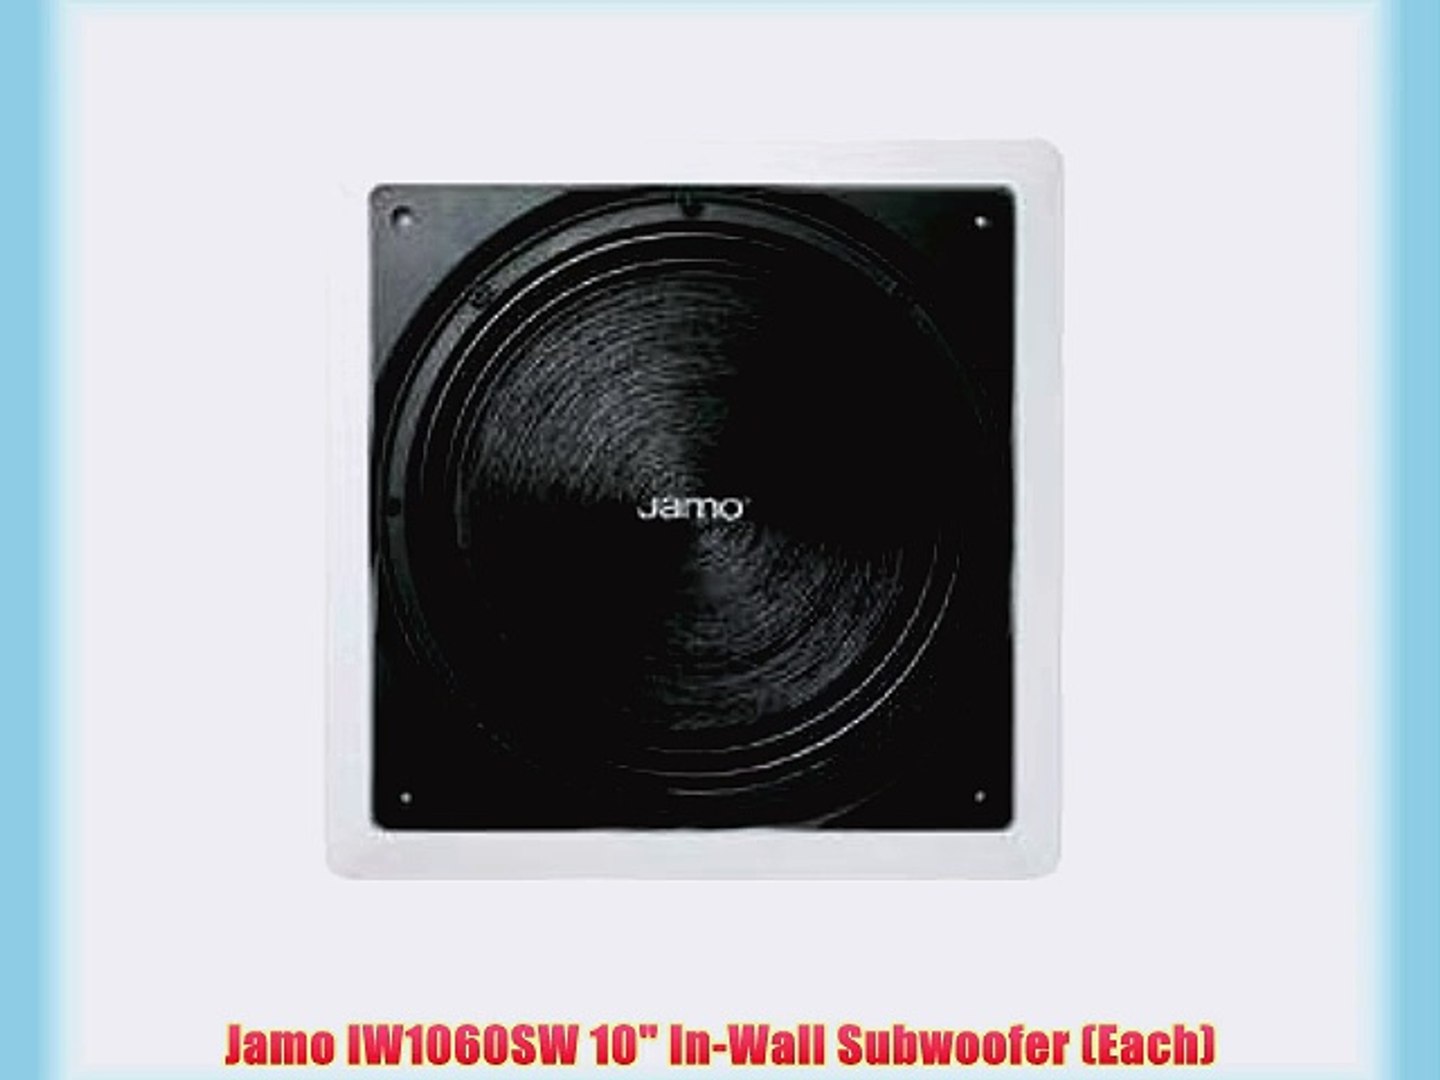 Jamo IW1060SW 10 In-Wall Subwoofer (Each) - video Dailymotion